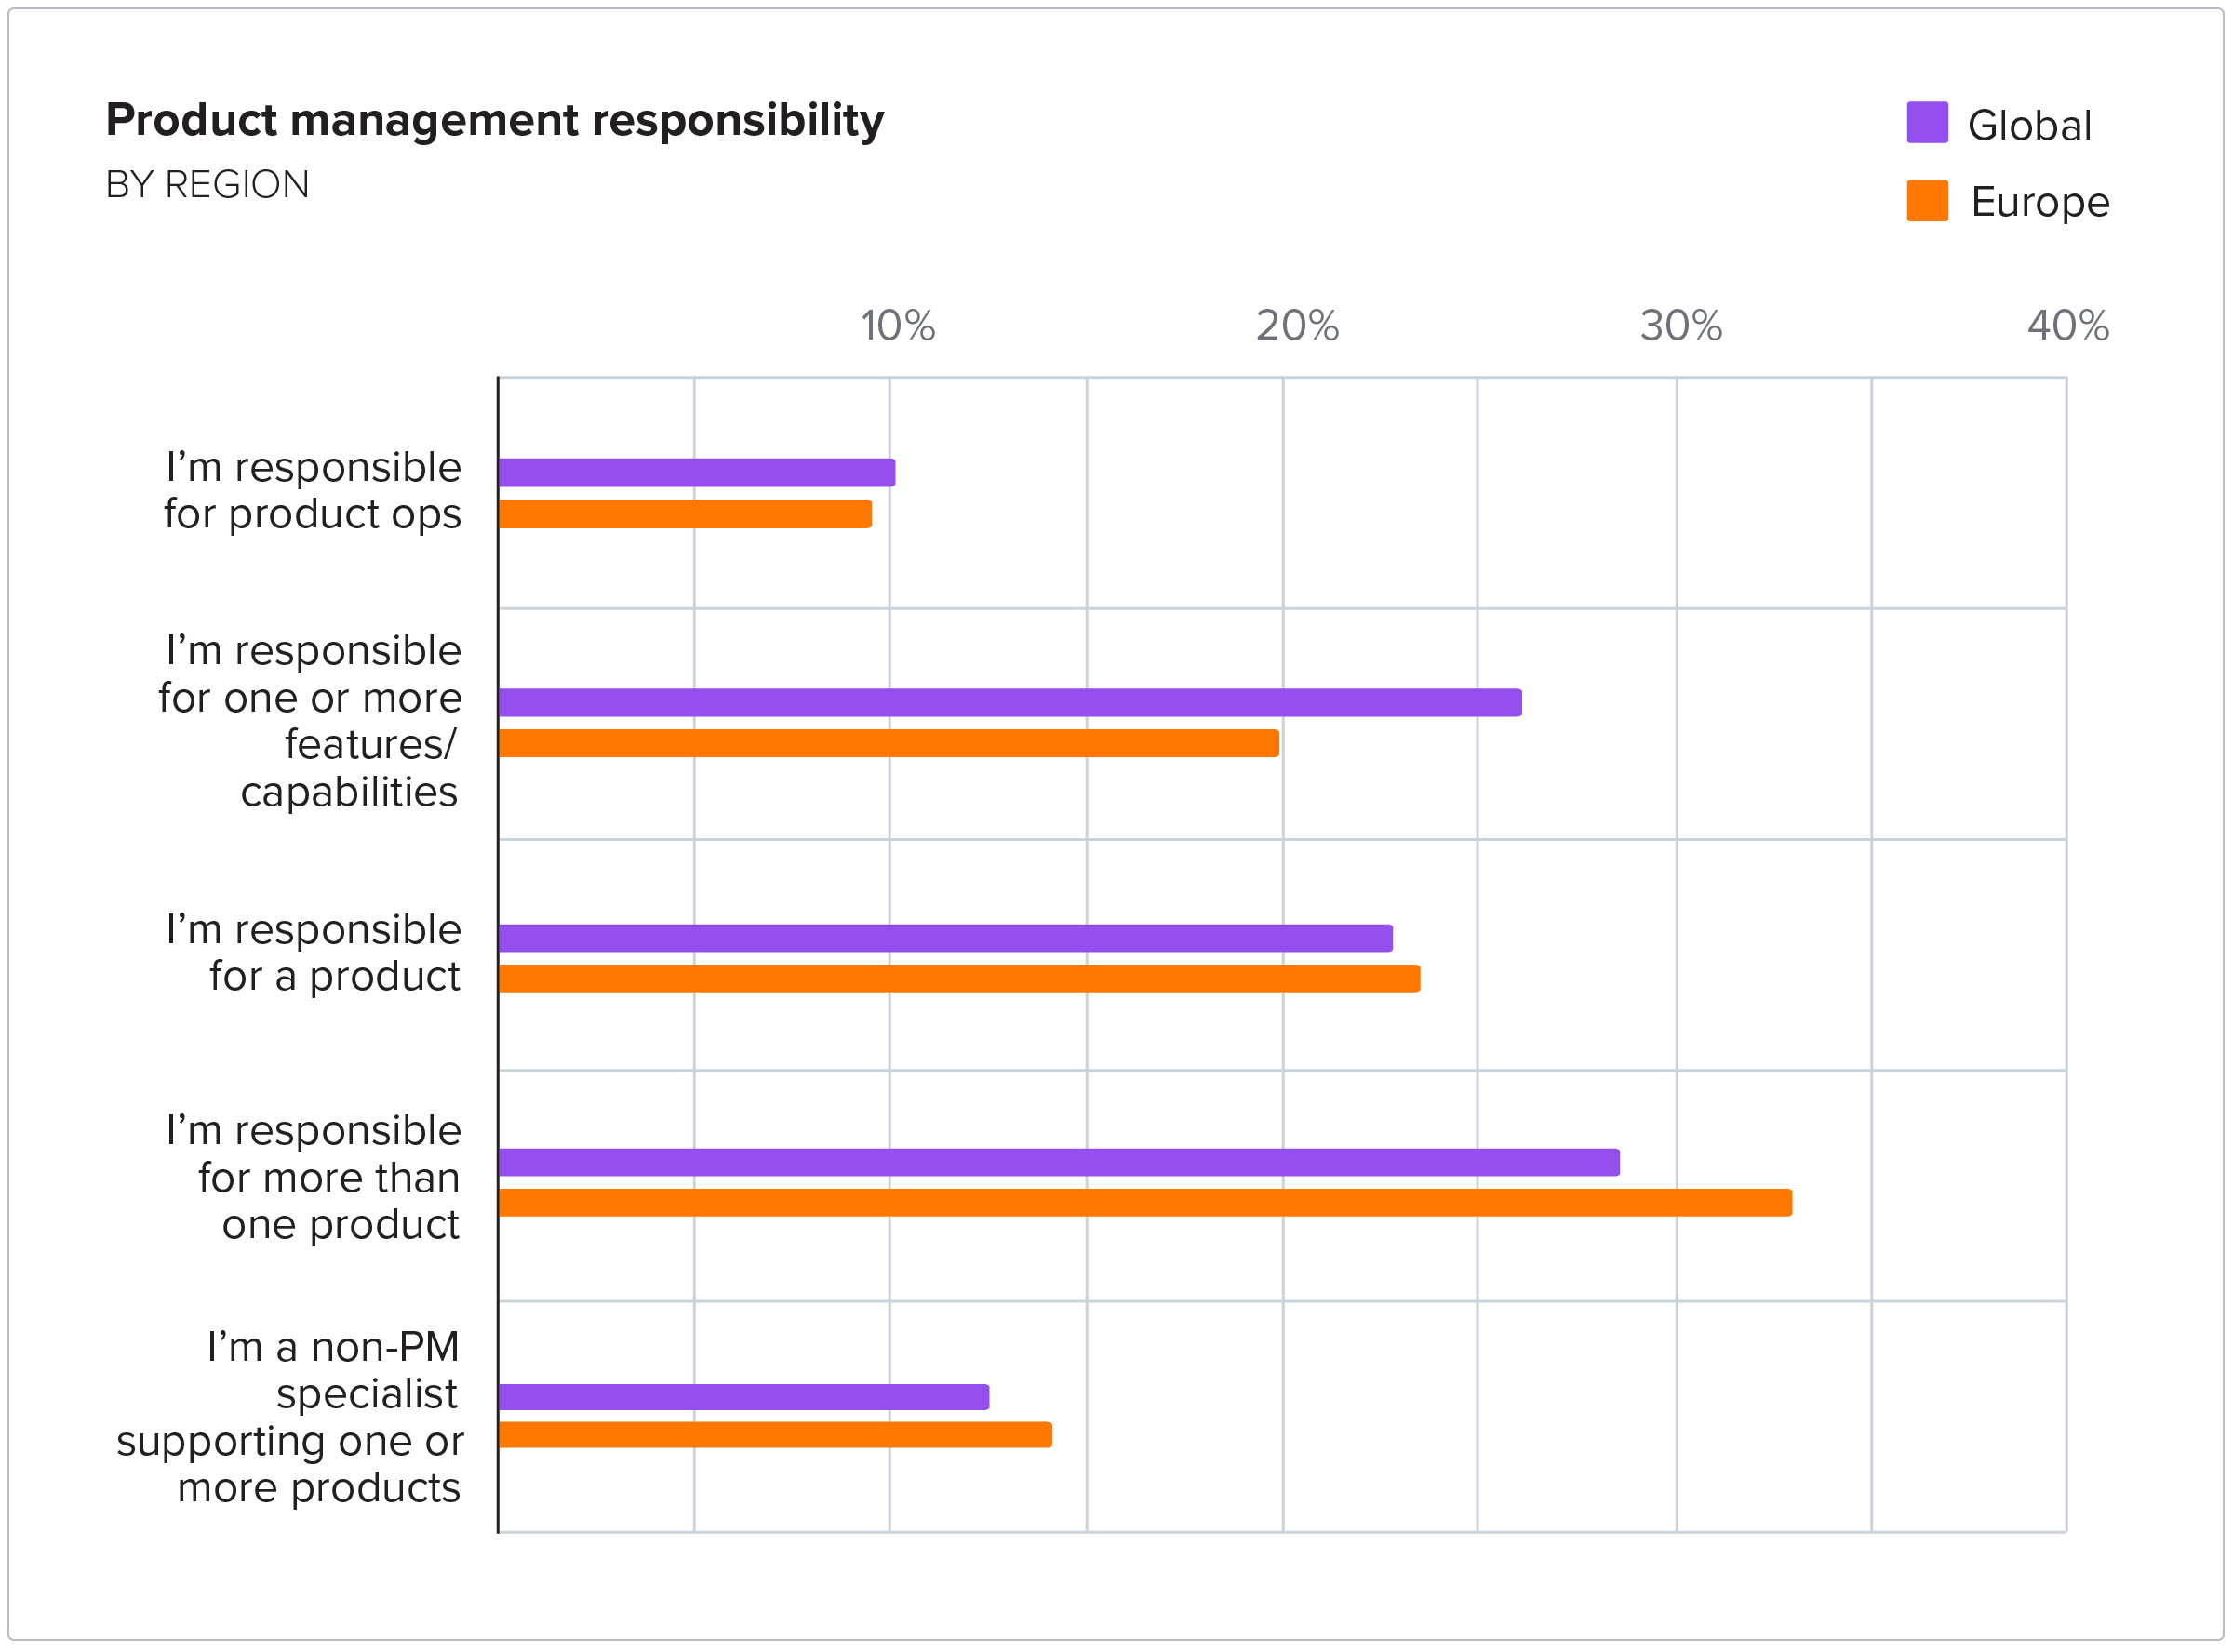 Product management responsibility by region